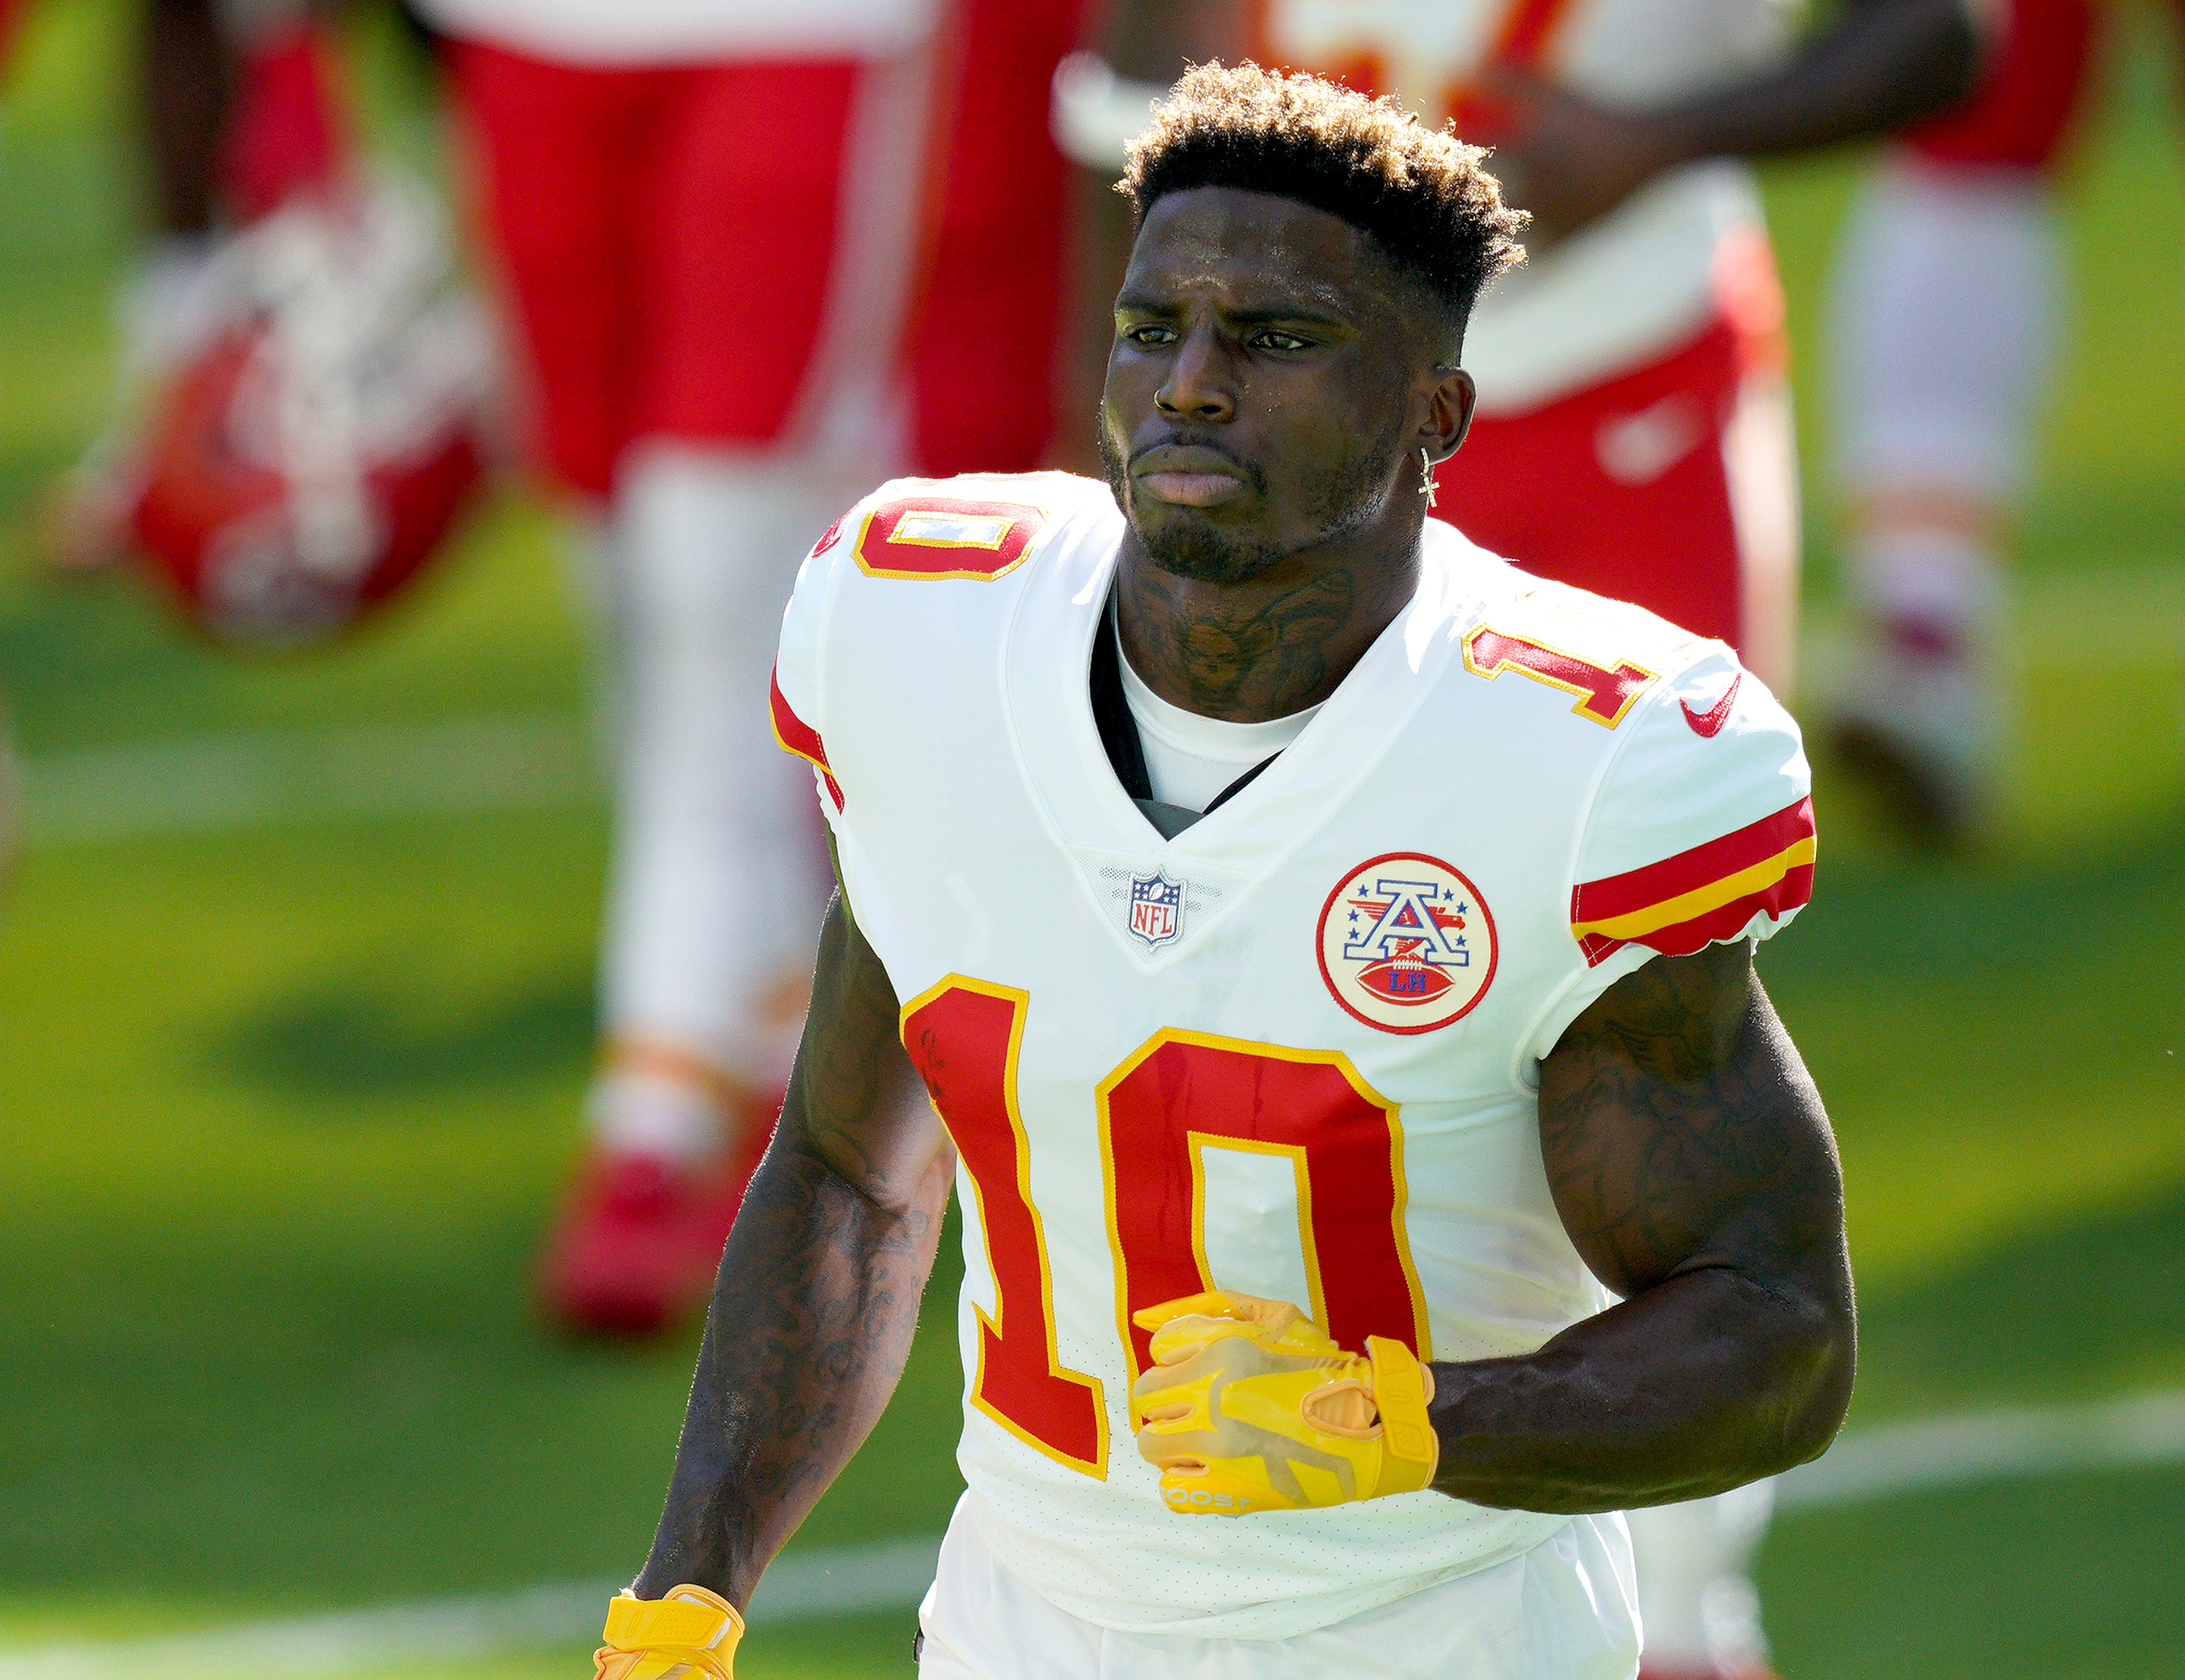 Tyreek Hill Is Chugging Pickle Juice on the Sideline for a Good Reason, According to a Doctor